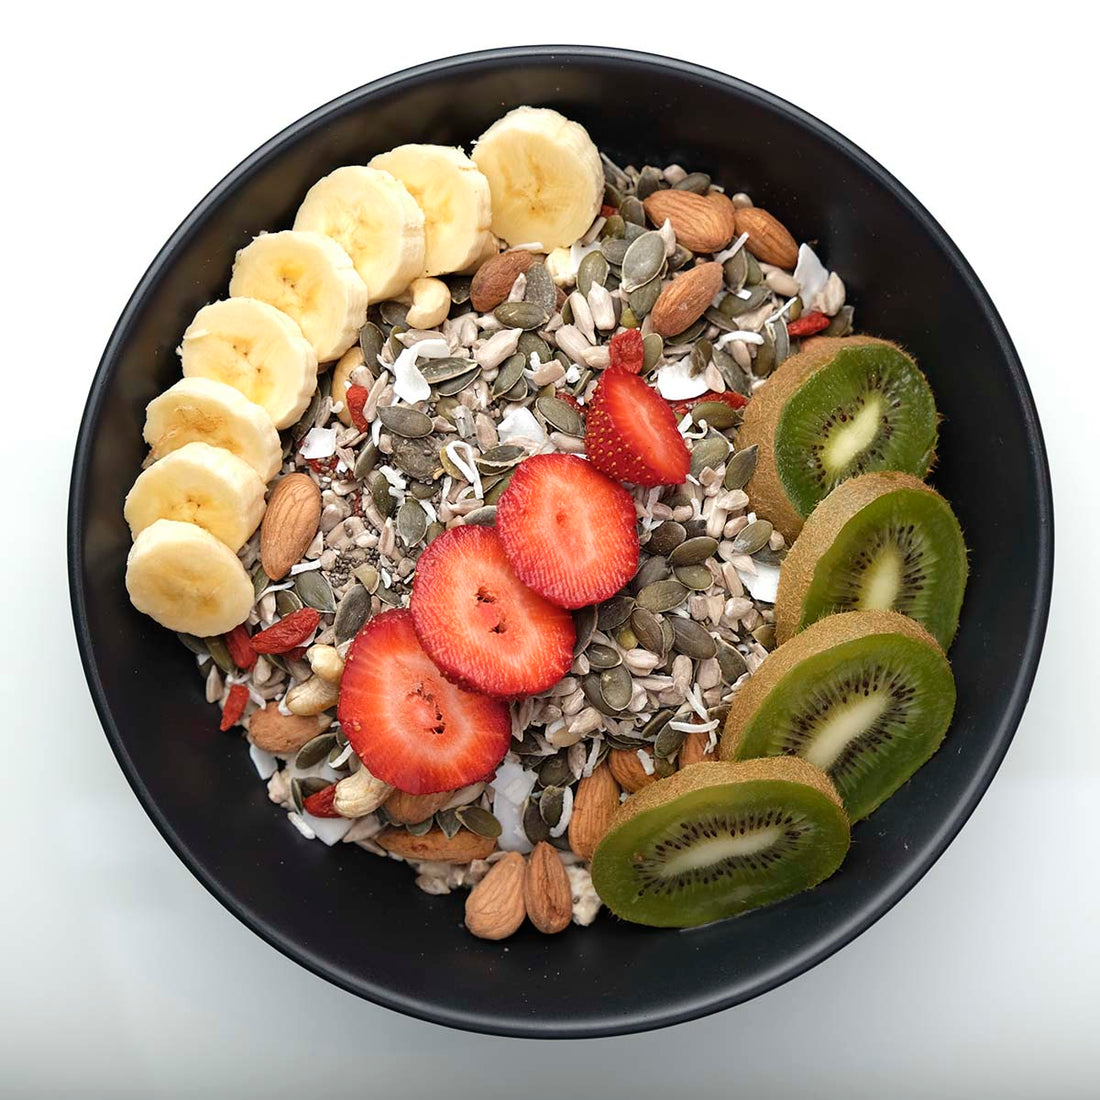 How to choose the best muesli